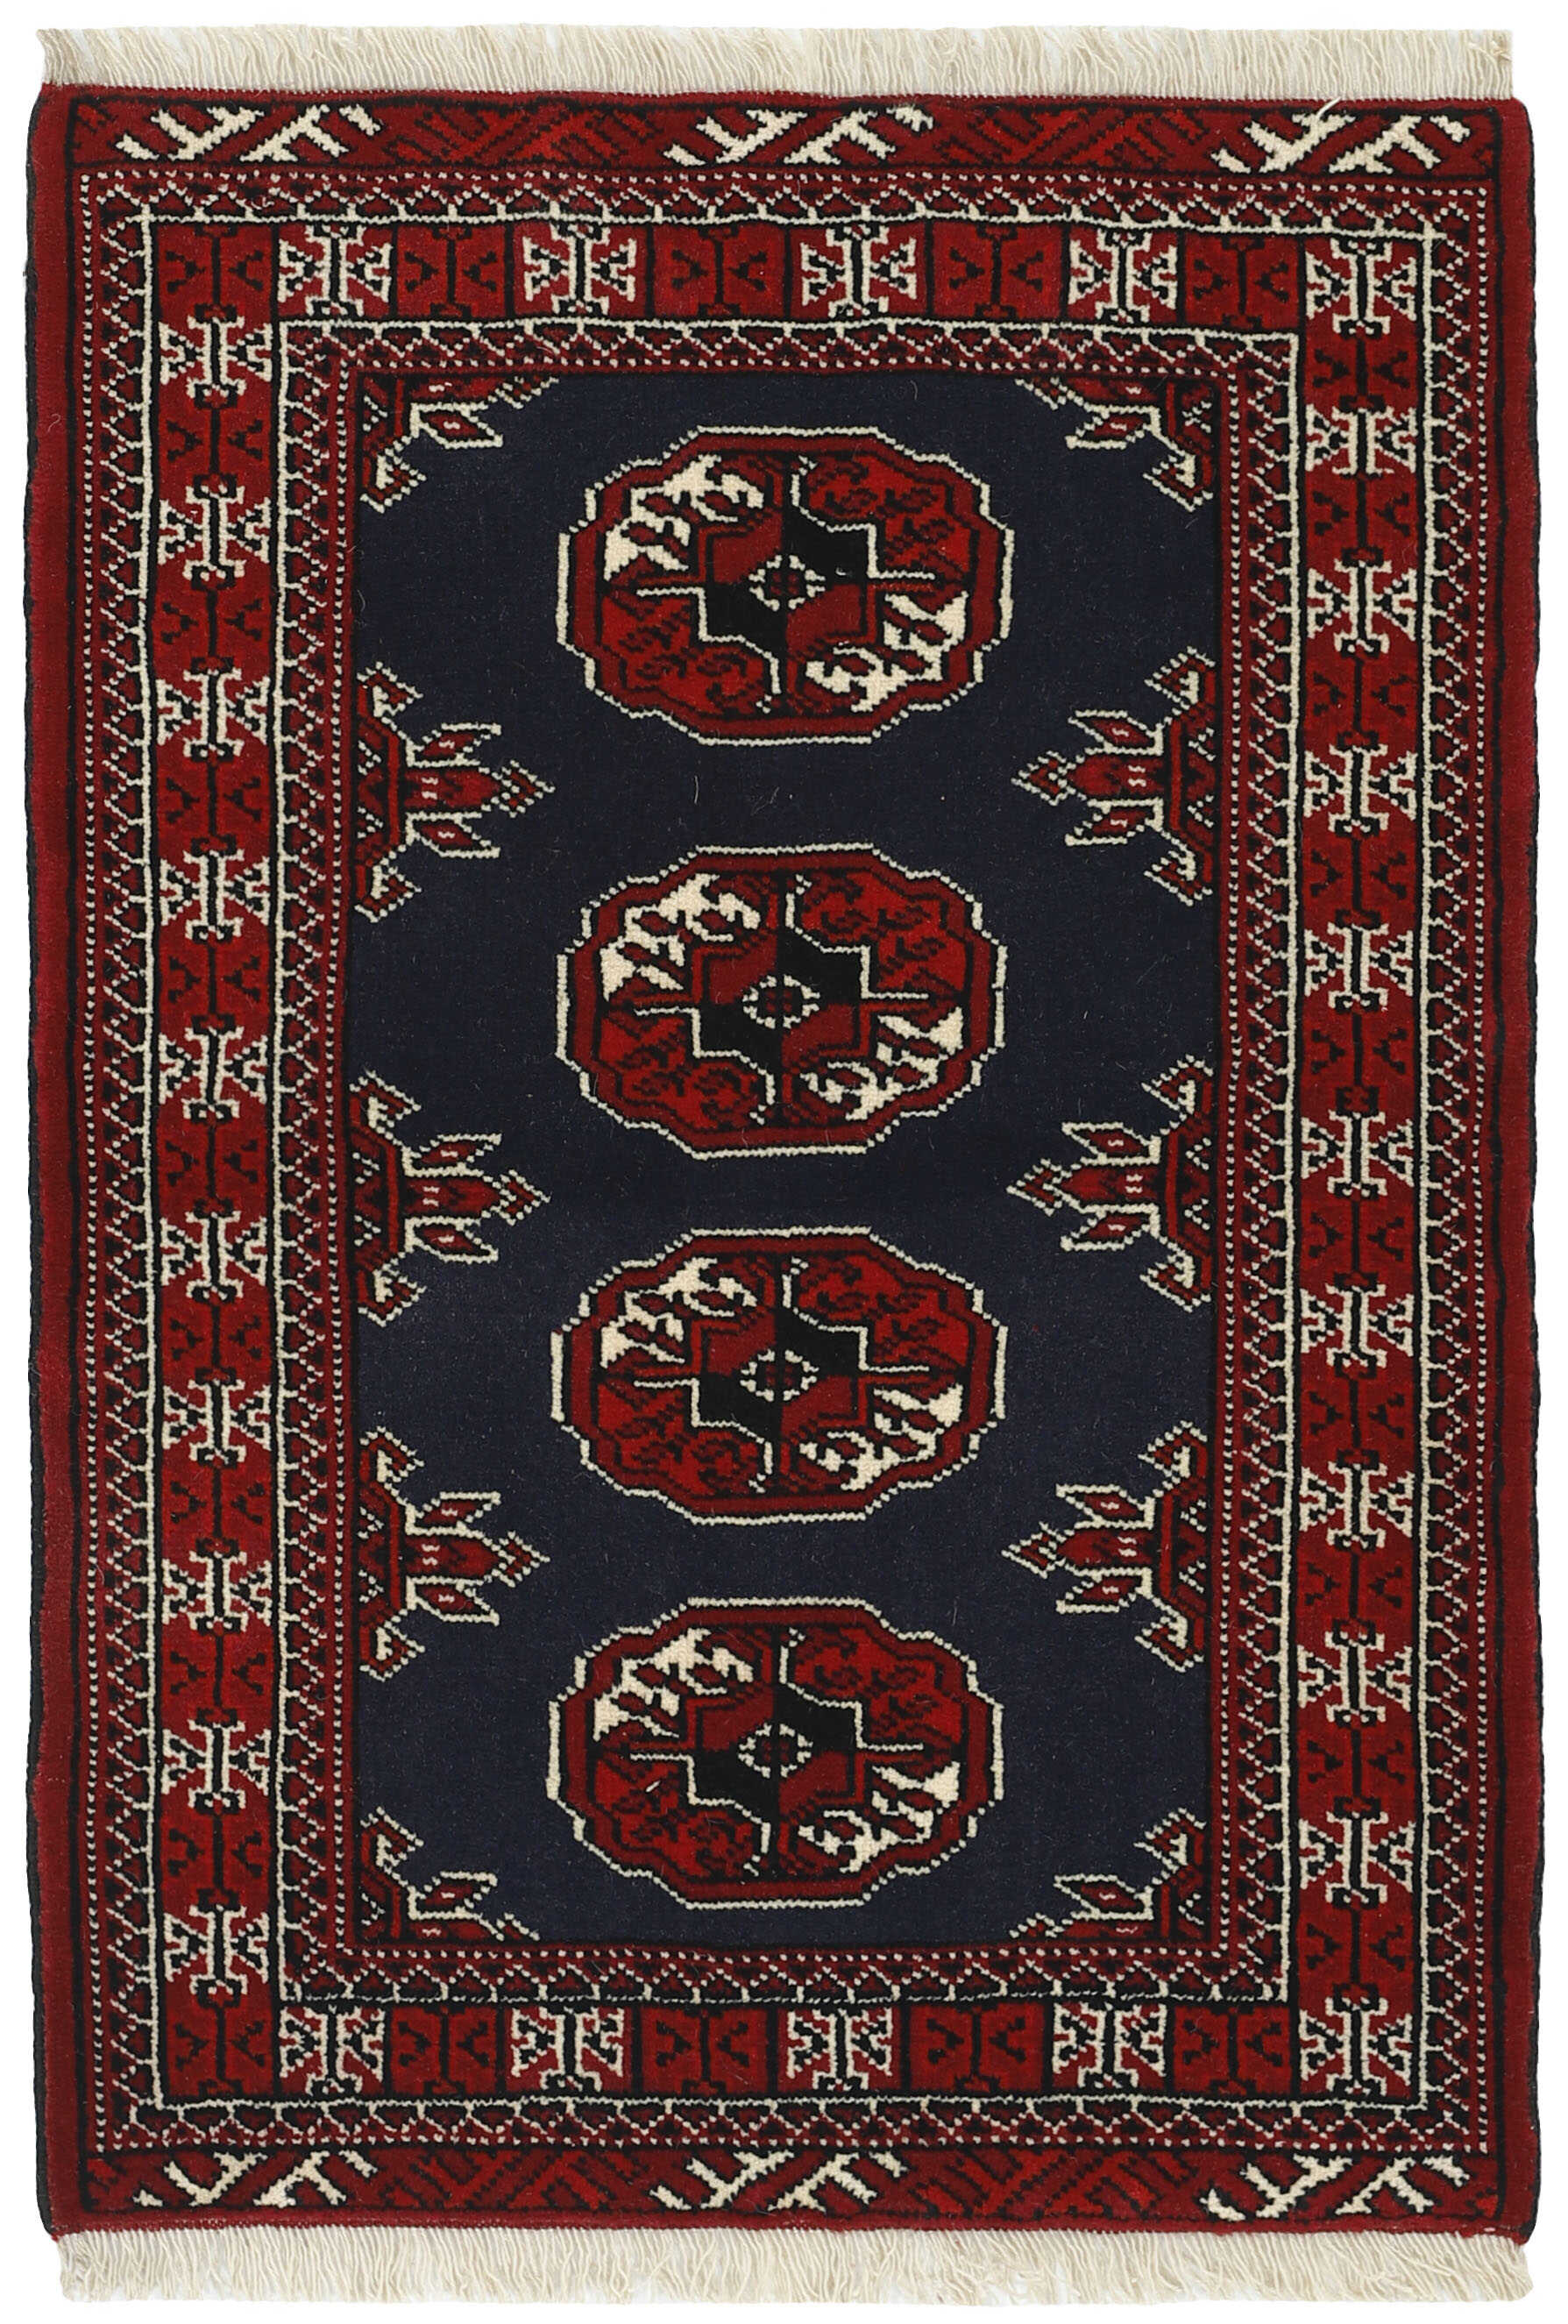 Authentic persian rug with a traditional design in red